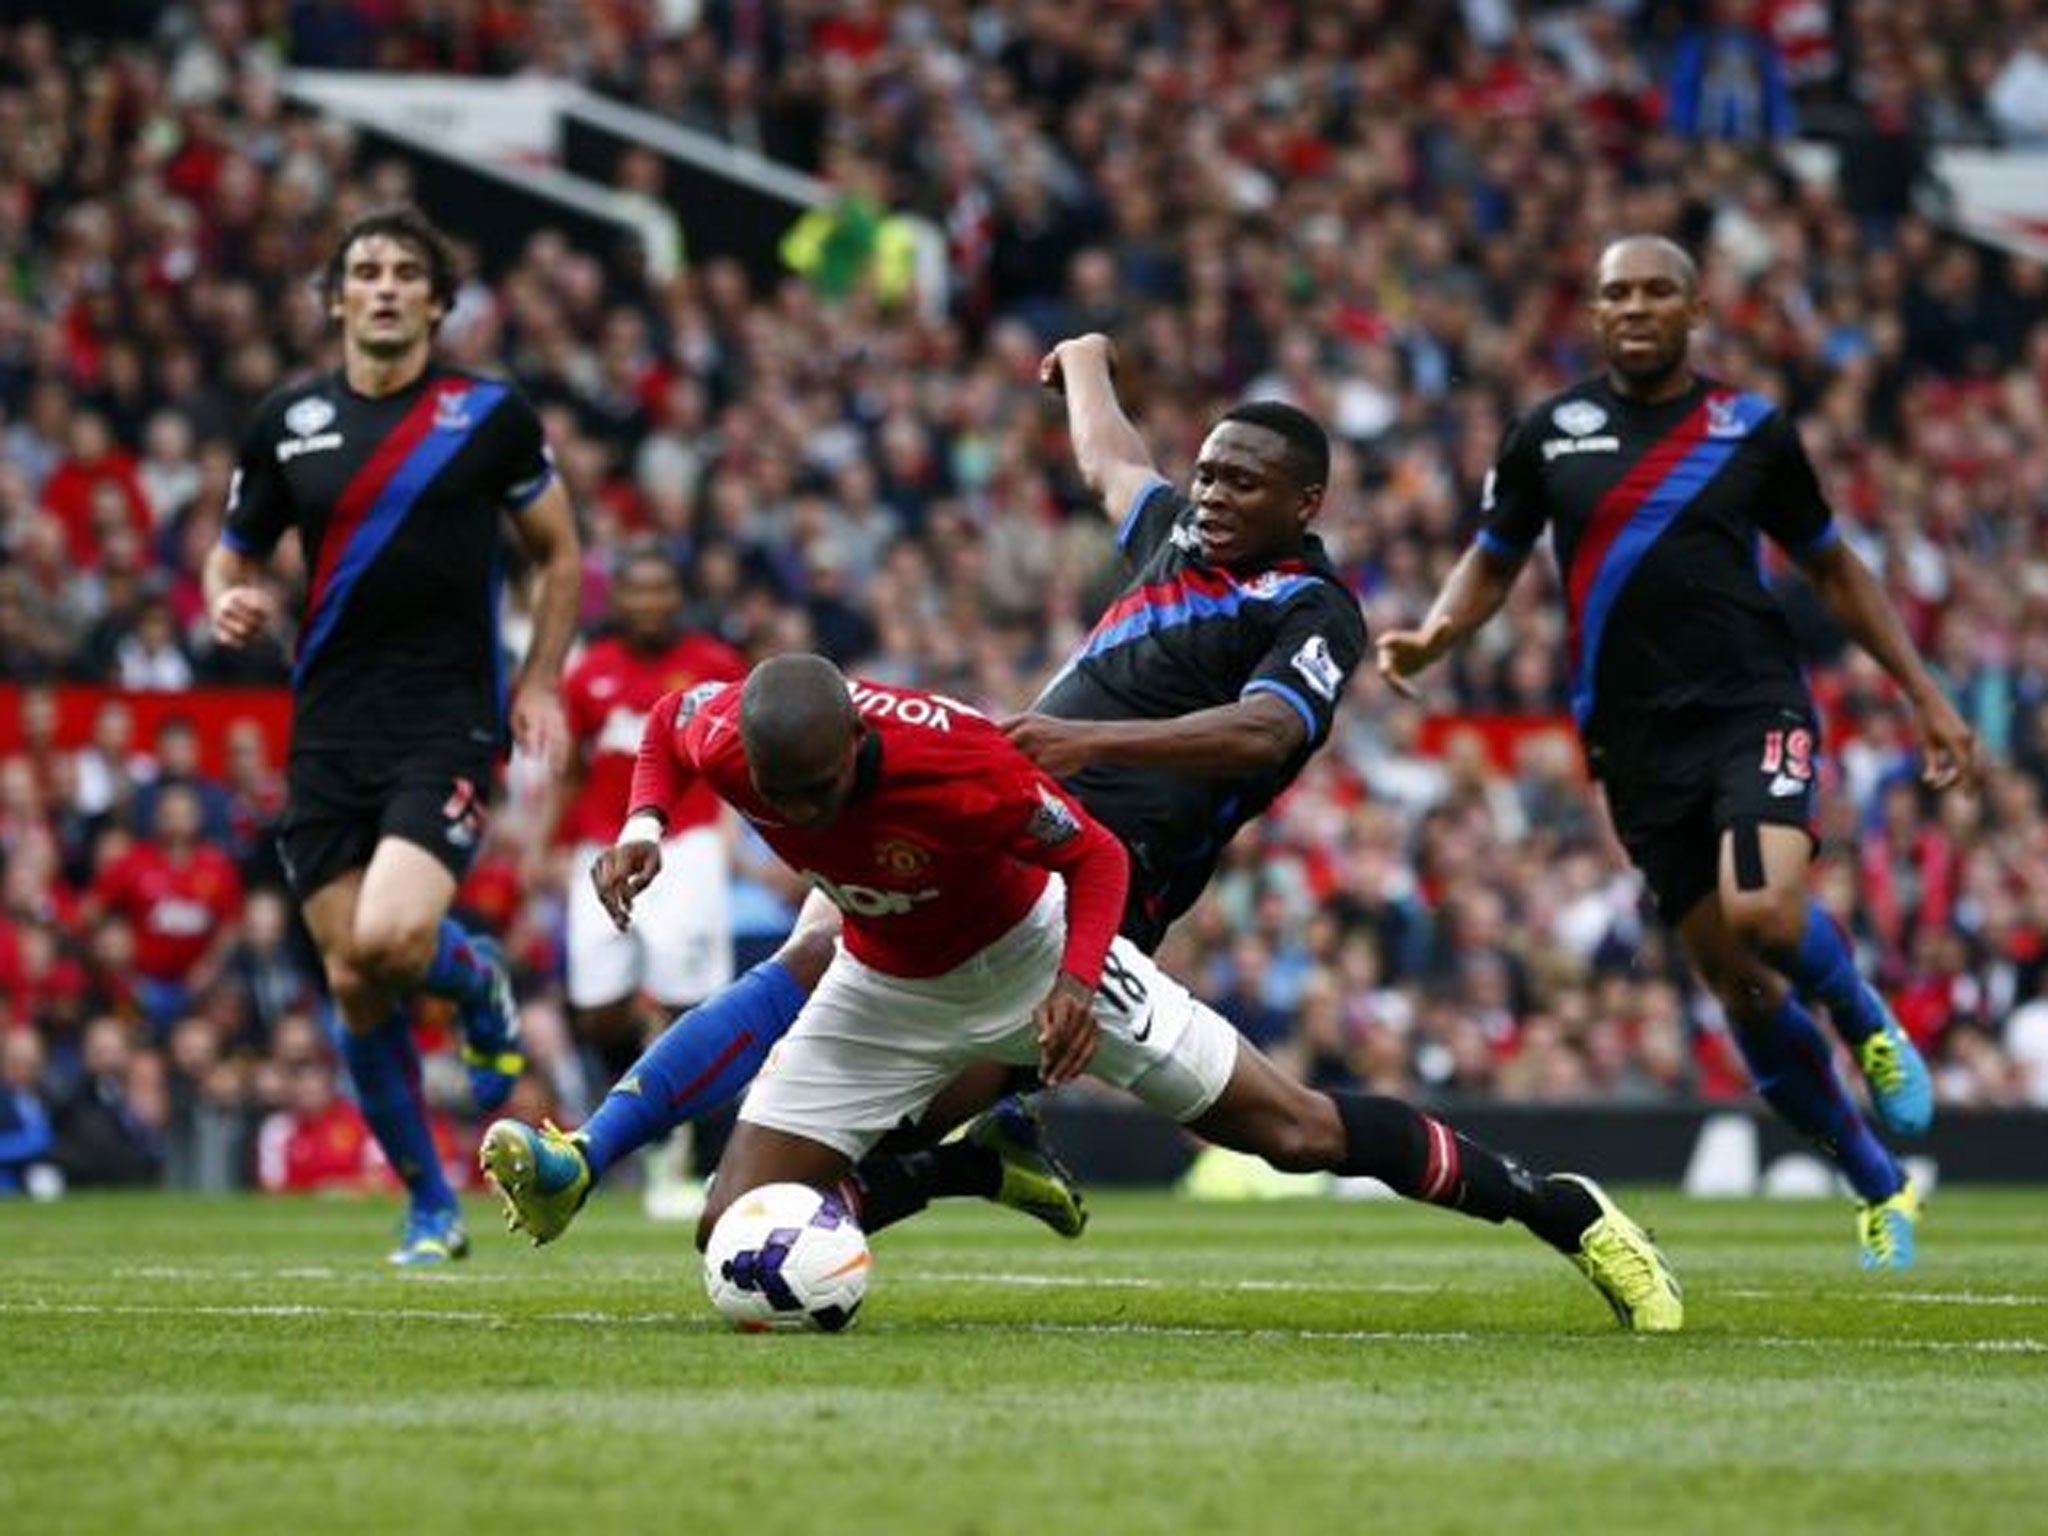 All fall down: Ashley Young tumbles easily at Old Trafford under a challenge from Kagisho Dikgacoi, earning a penalty for Manchester United and the Crystal Palace player’s dismissal for two yellow cards